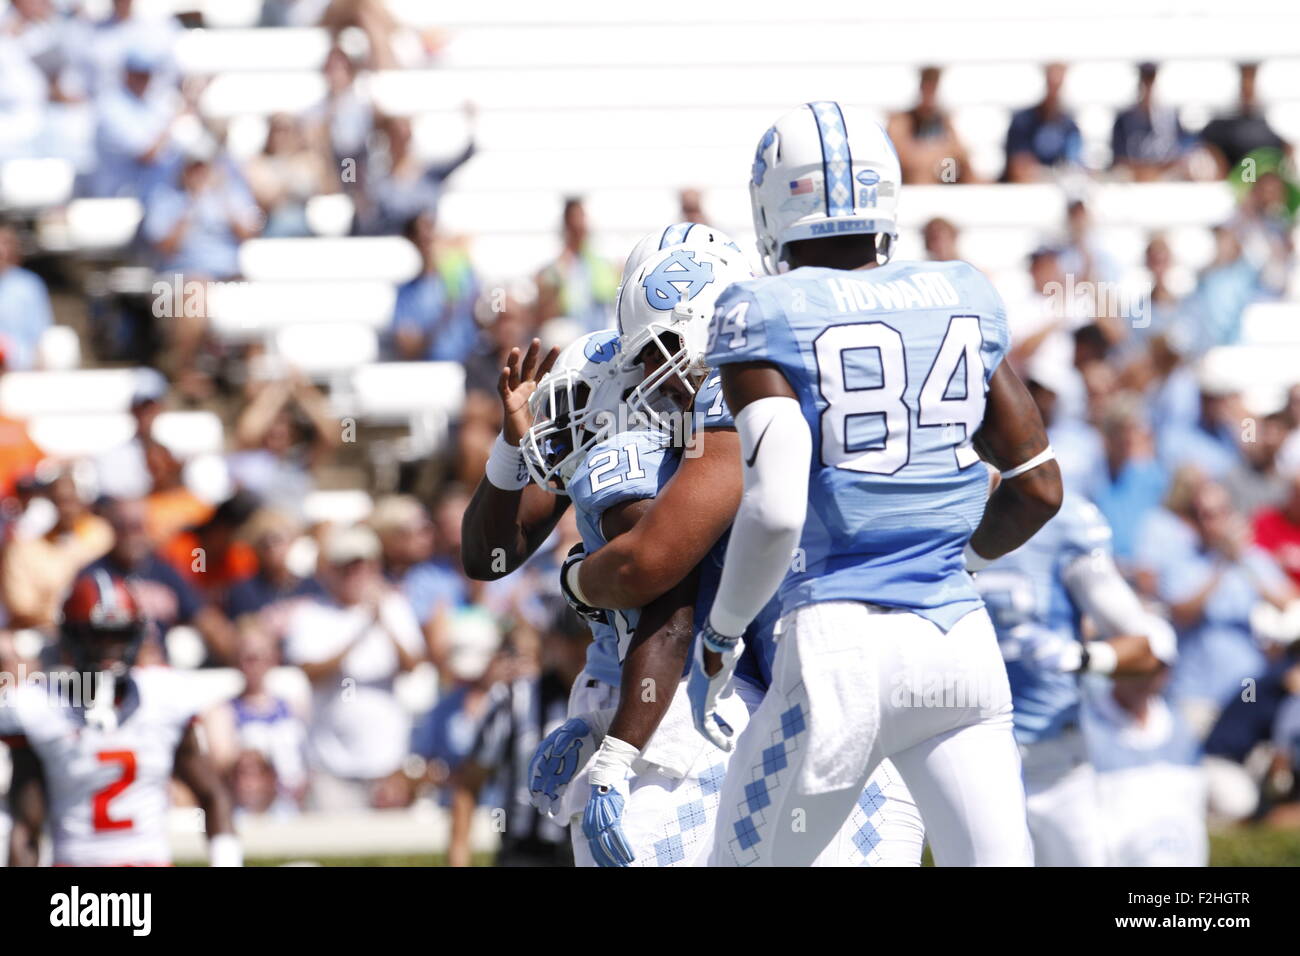 September 19, 2015: Romar Morris (21) of the North Carolina Tar Heels celebrates with teammates after making the catch for the first touchdown of the NCAA football matchup between the Fighting Illini of Illinois and the North Carolina Tarheels at Kenan Memorial Stadium in Chapel Hill, NC. Scott Kinser/CSM Stock Photo